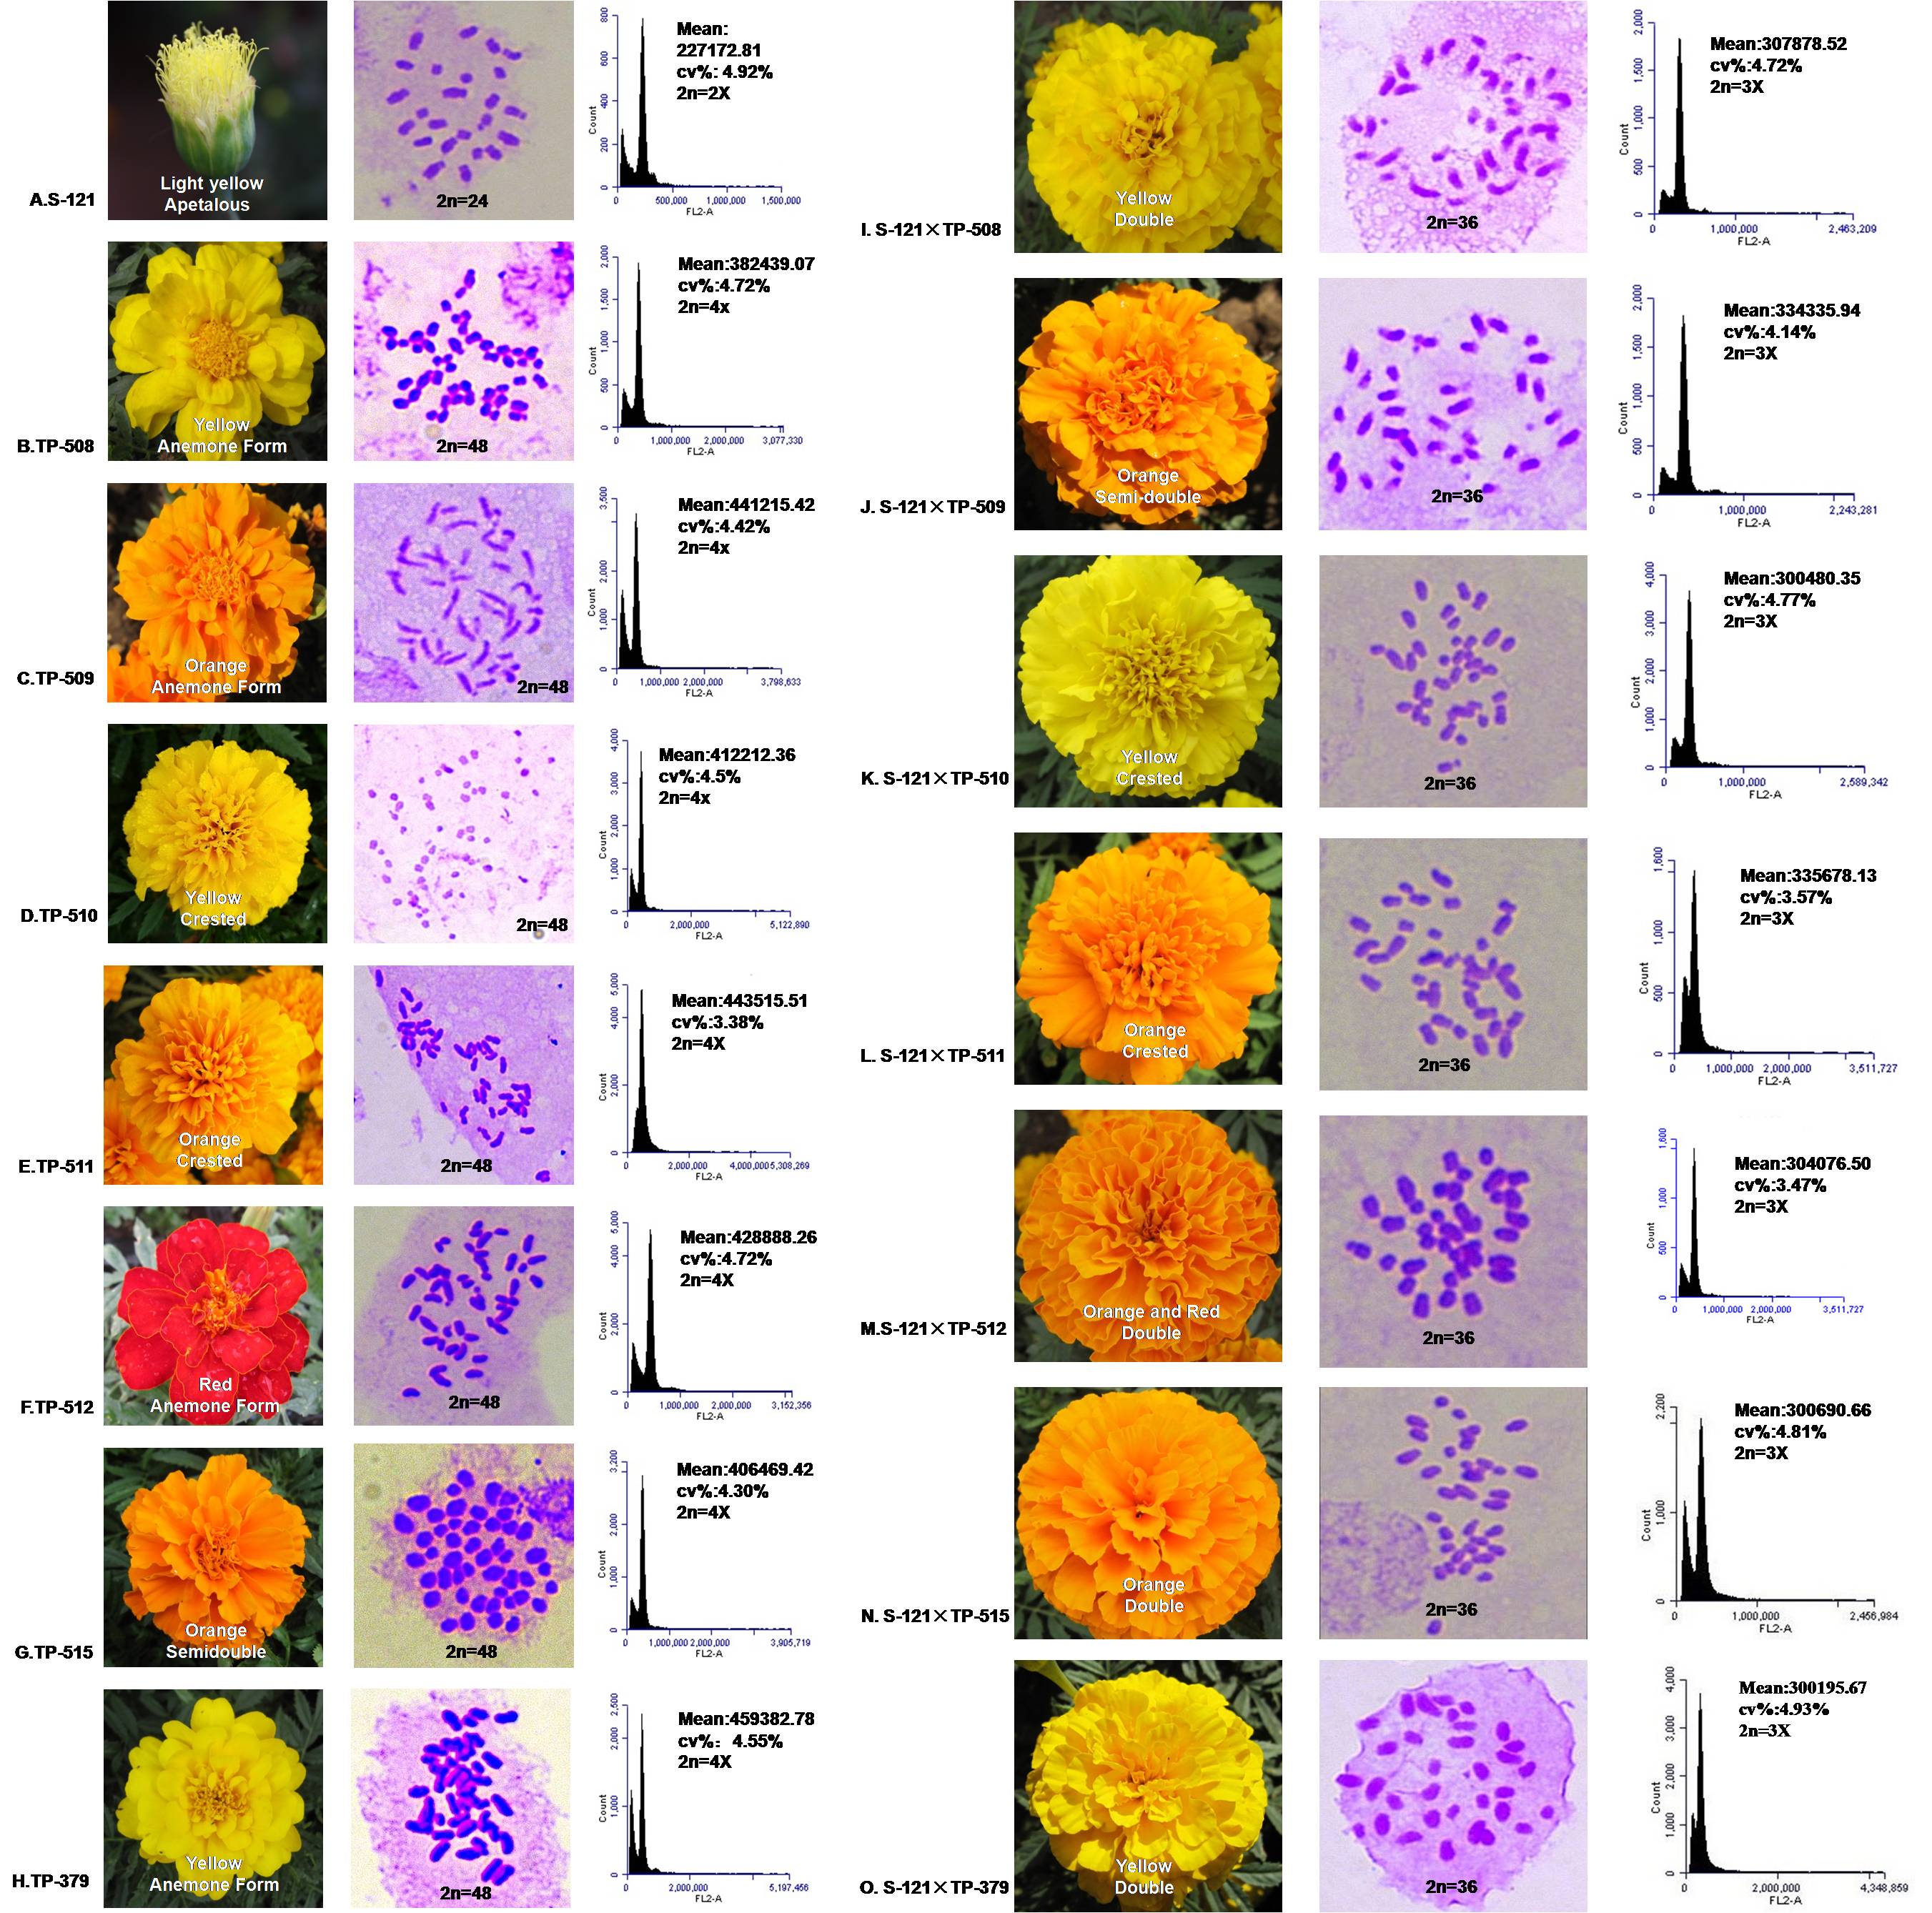 Zhang et al., 2019. Identify Suitable Parents of Tagetes erecta and T. patula for Heterotic Hybrid Breeding